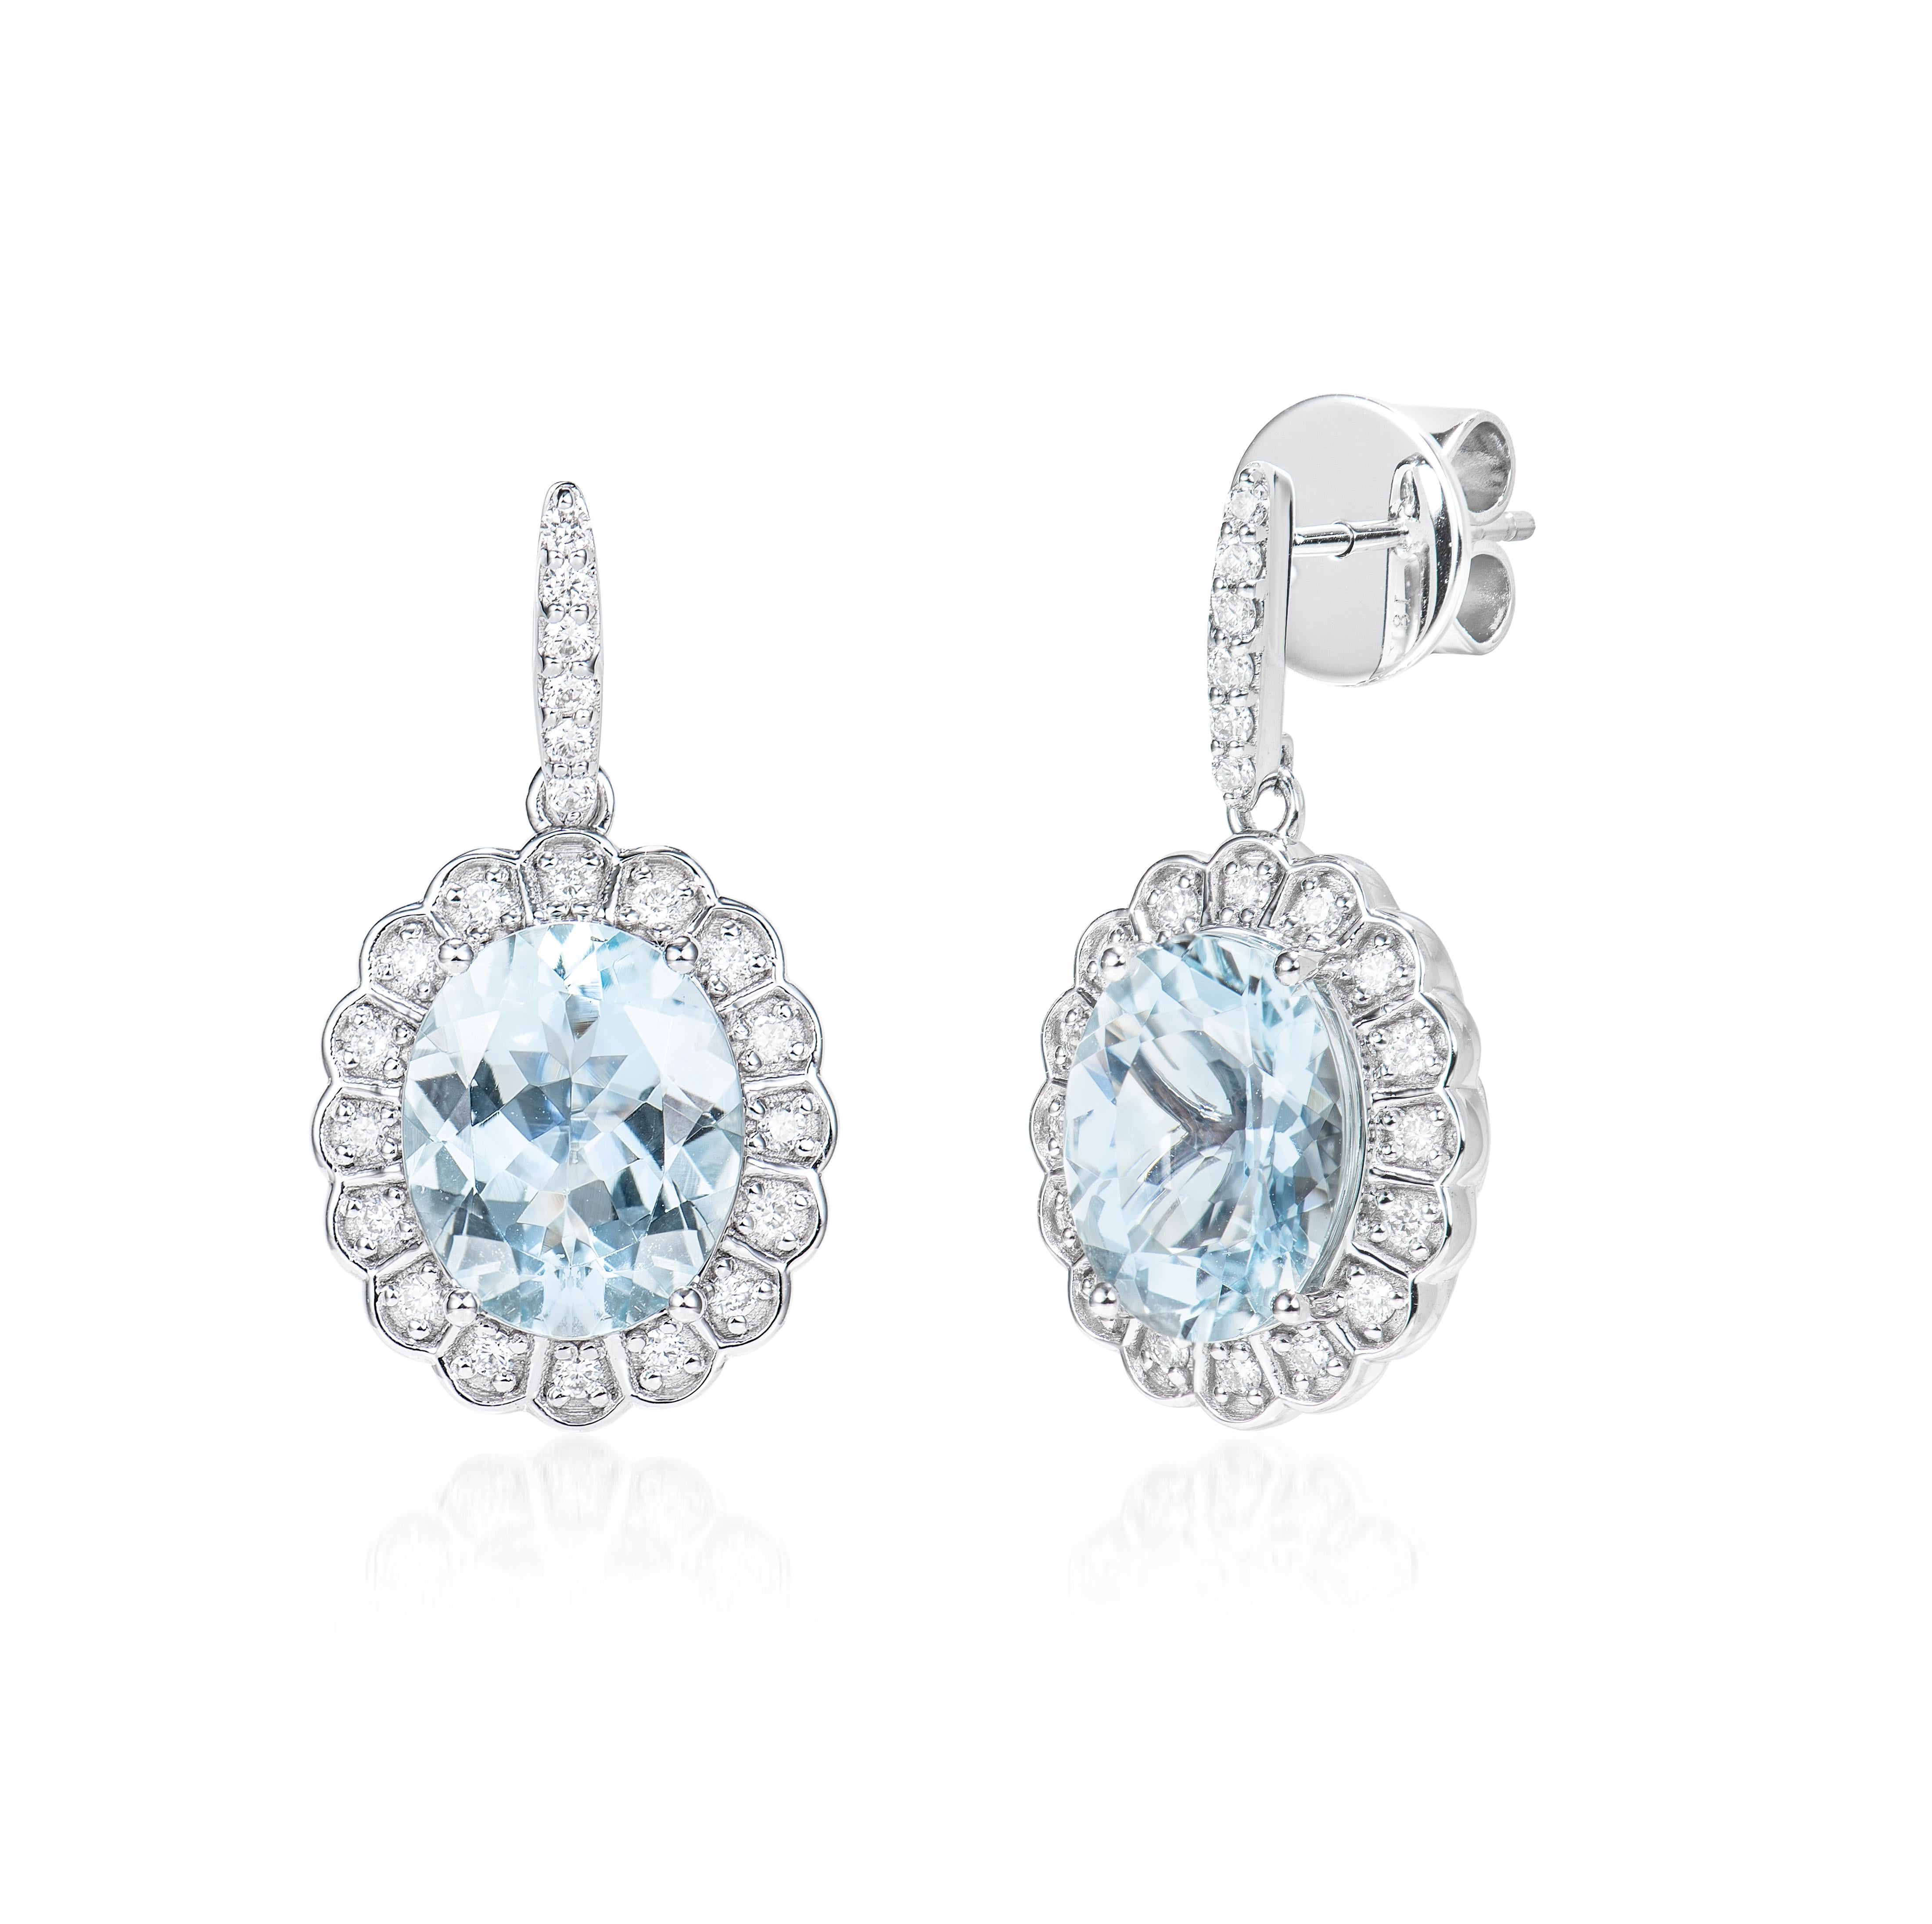 Oval Cut 5.52 Carat Aquamarine Drop Earrings in 18Karat White Gold with Diamond For Sale